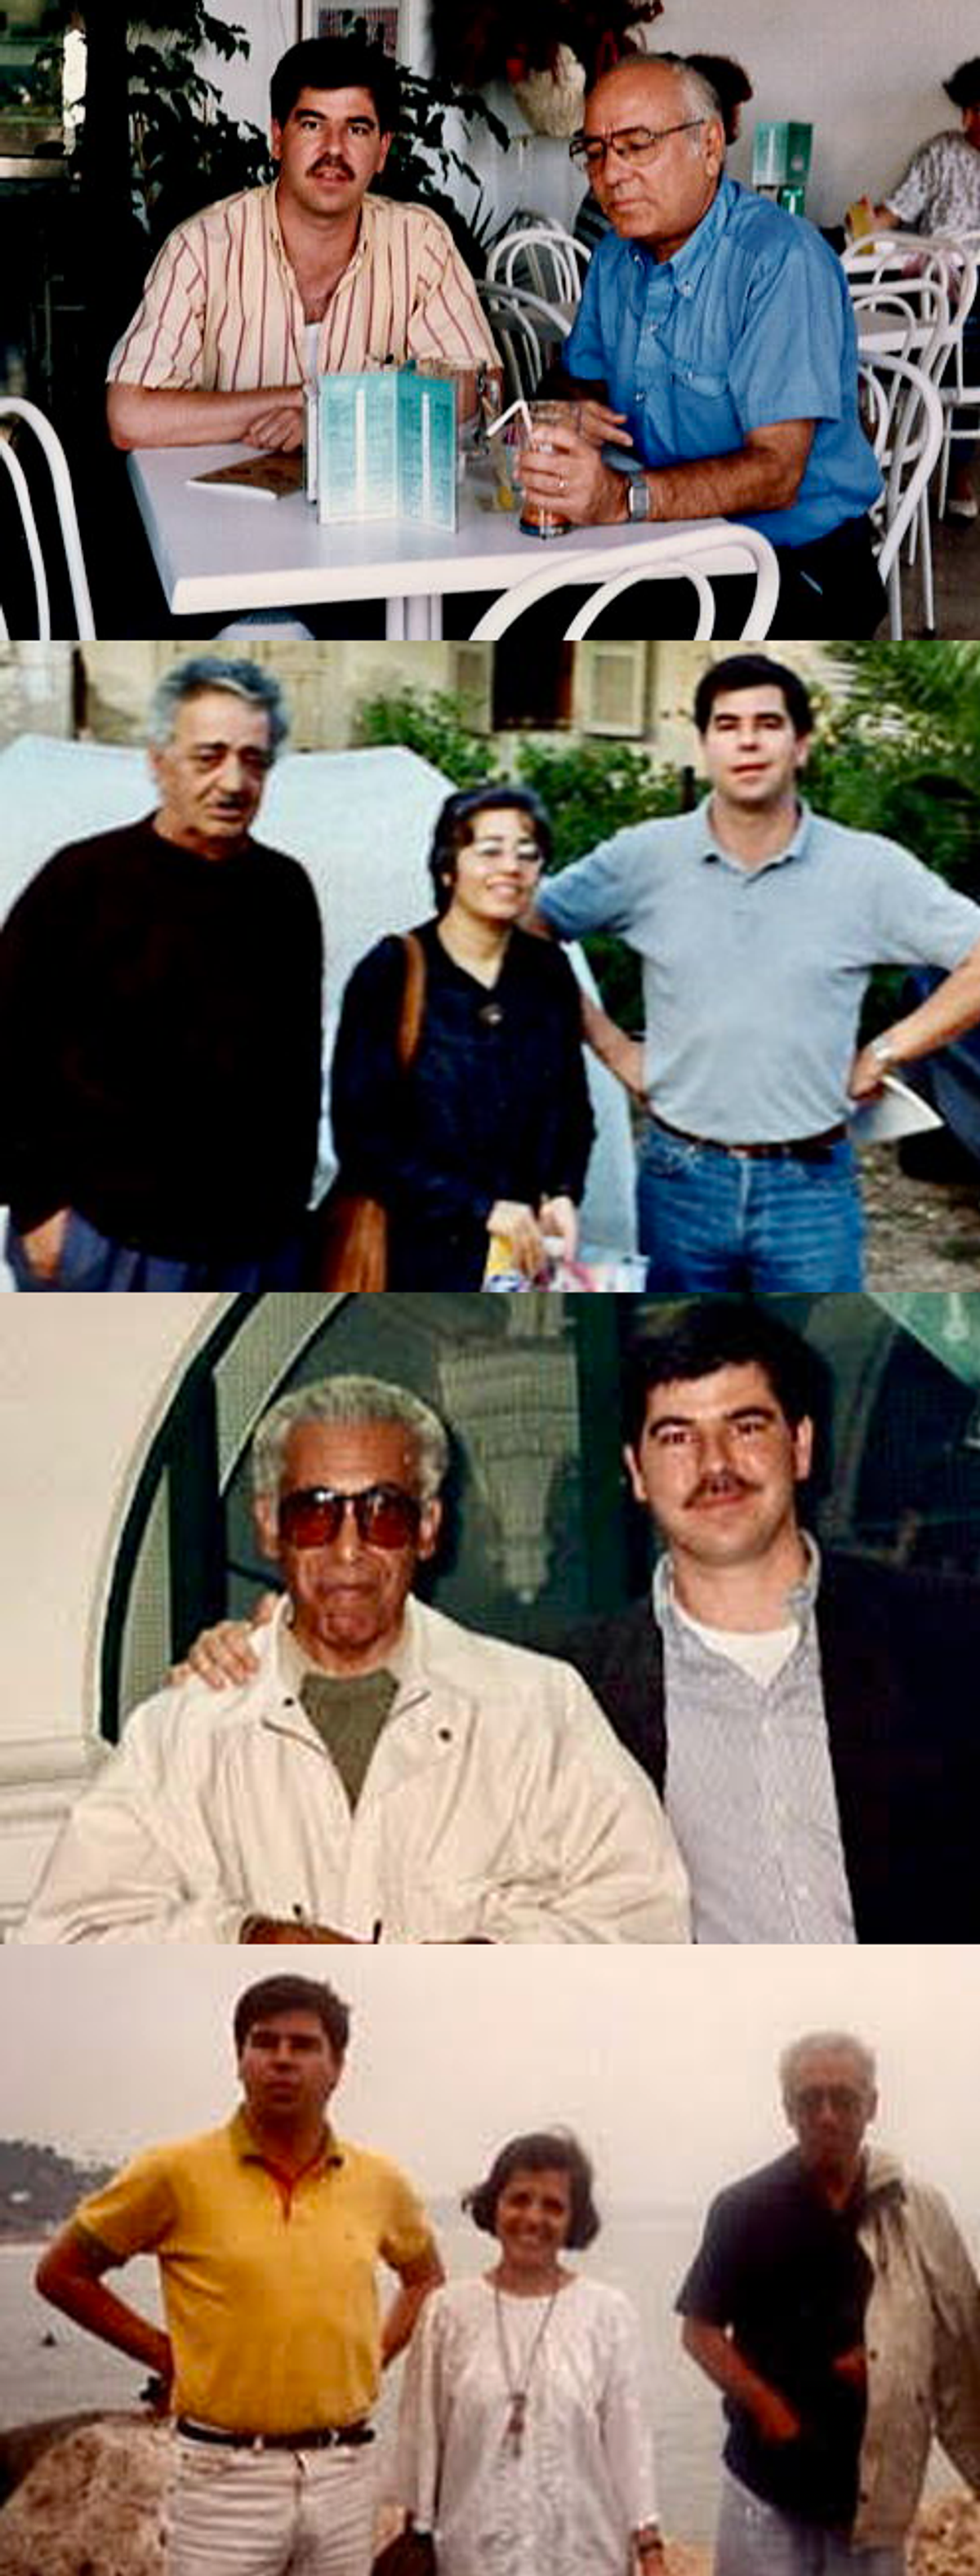 The author with (from top to bottom) Sasson Somekh in Tel Aviv, 1994; Emile Habiby (with his assistant Siham Daoud in the middle) in Haifa, undated; Abdelrahman Munif in London, undated; and again with Abdelrahman Munif (and Suad Munif) in Malibu, California, in 1993 (Photos courtesy the author)